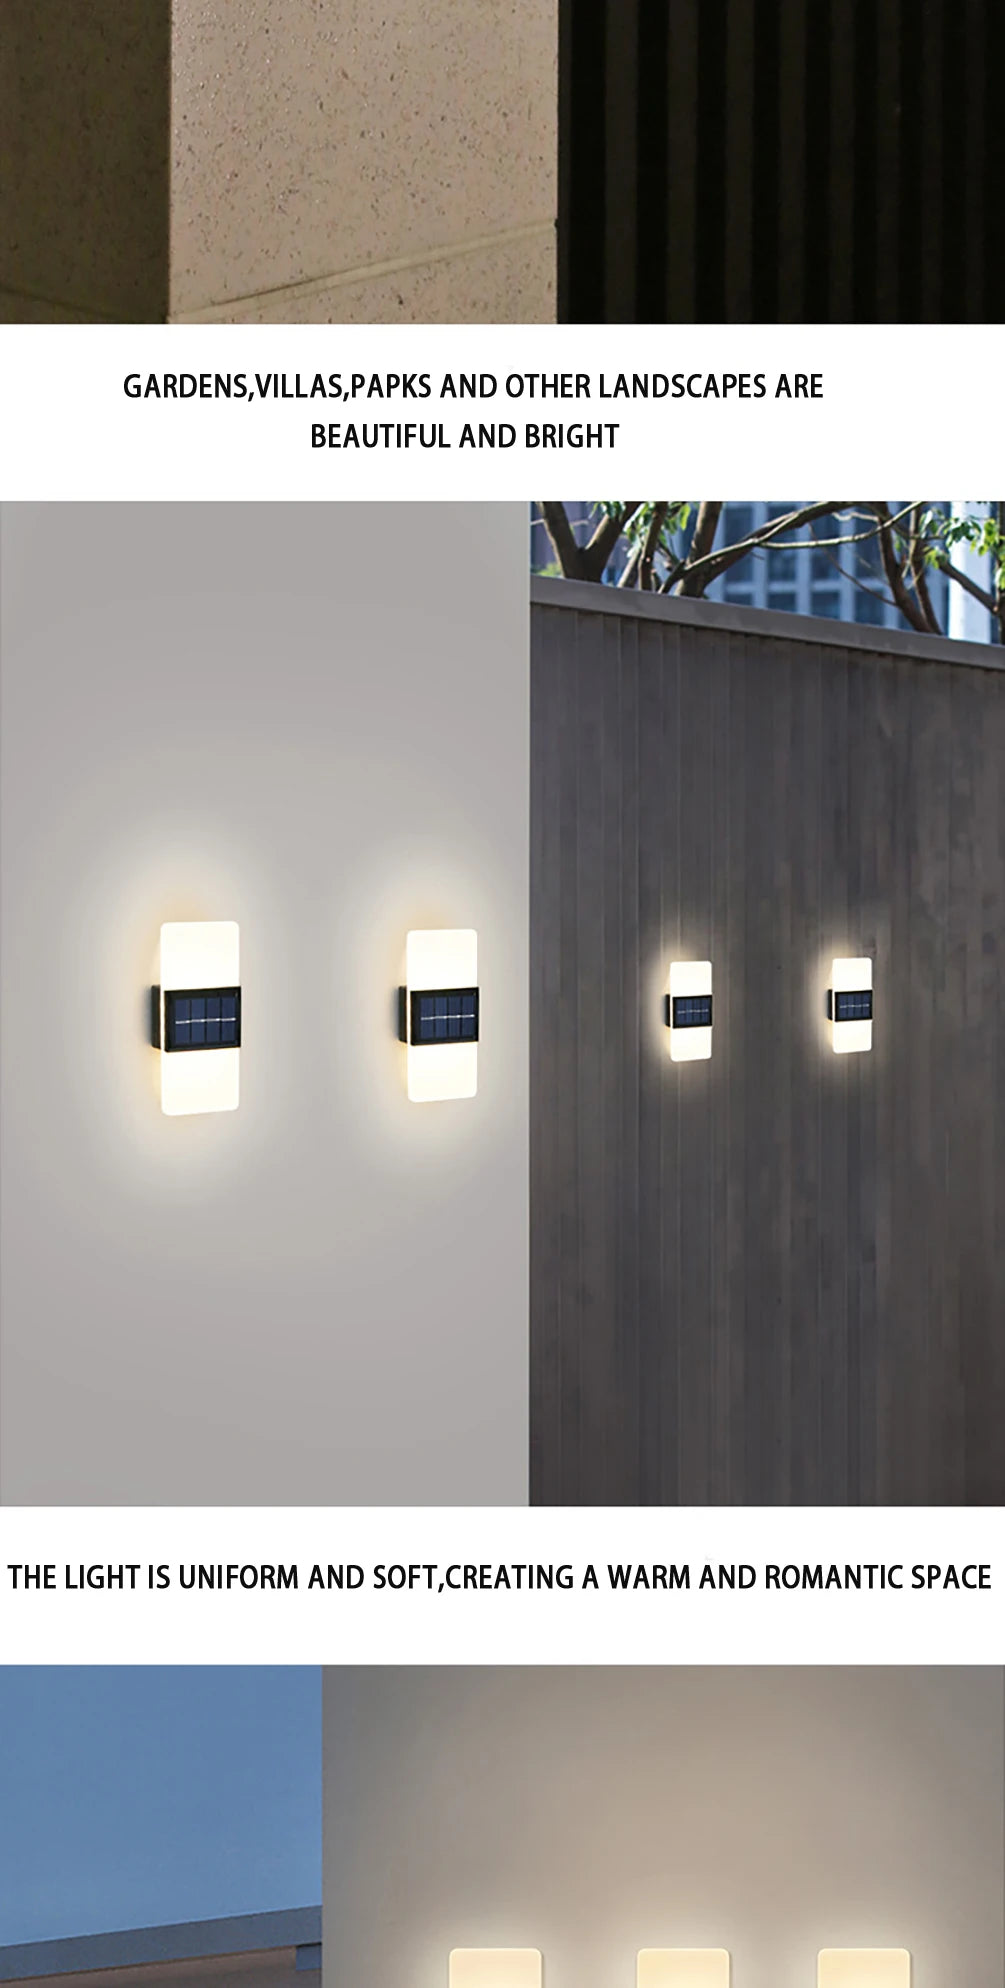 LED Solar Wall Light, Soft, solar-powered lighting creates warm ambiance for gardens, villas, and parks.